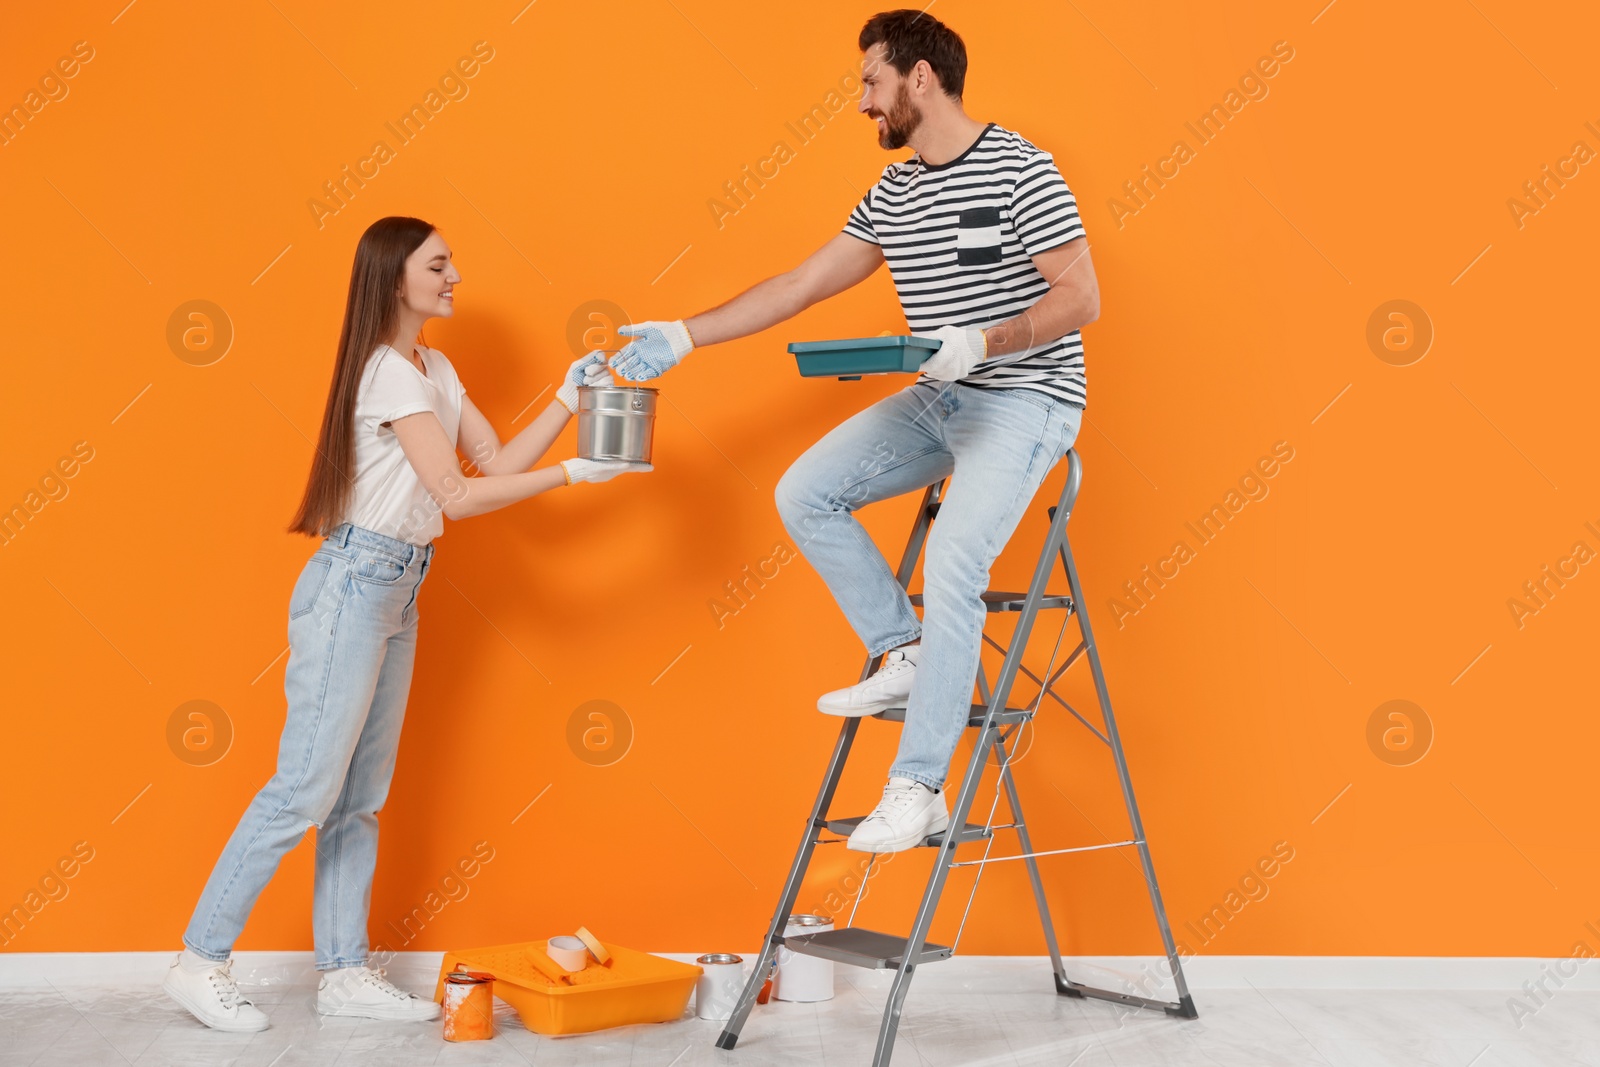 Photo of Woman giving can of paint to man near orange wall indoors. Interior design